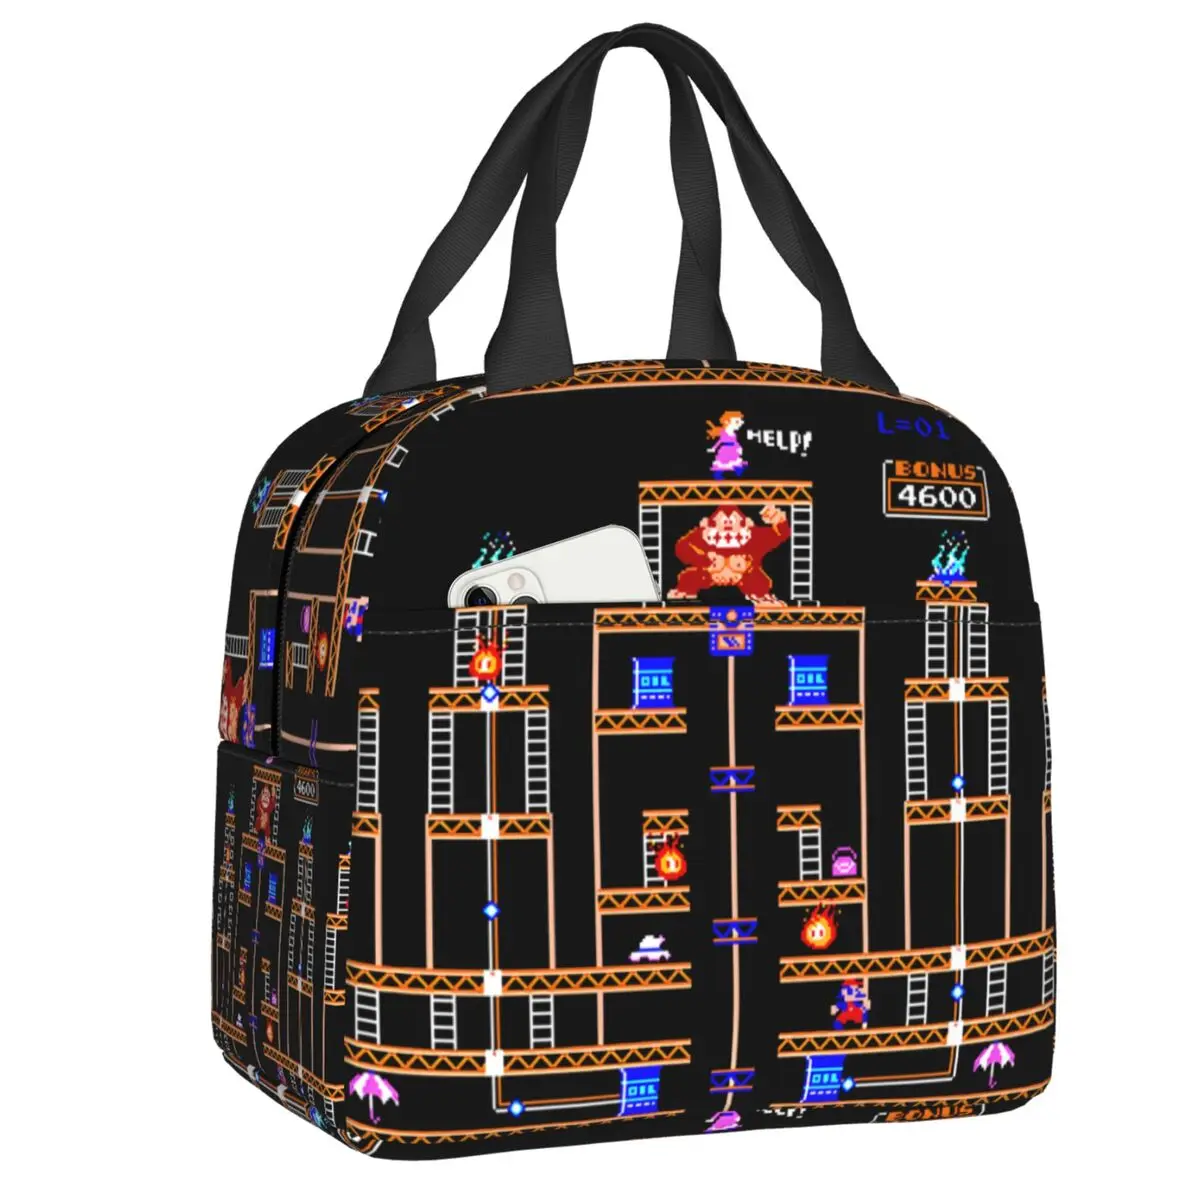 

Donkey Kong Thermal Insulated Lunch Bags Women Arcade Video Game Lunch Tote for Work School Travel Multifunction Food Box